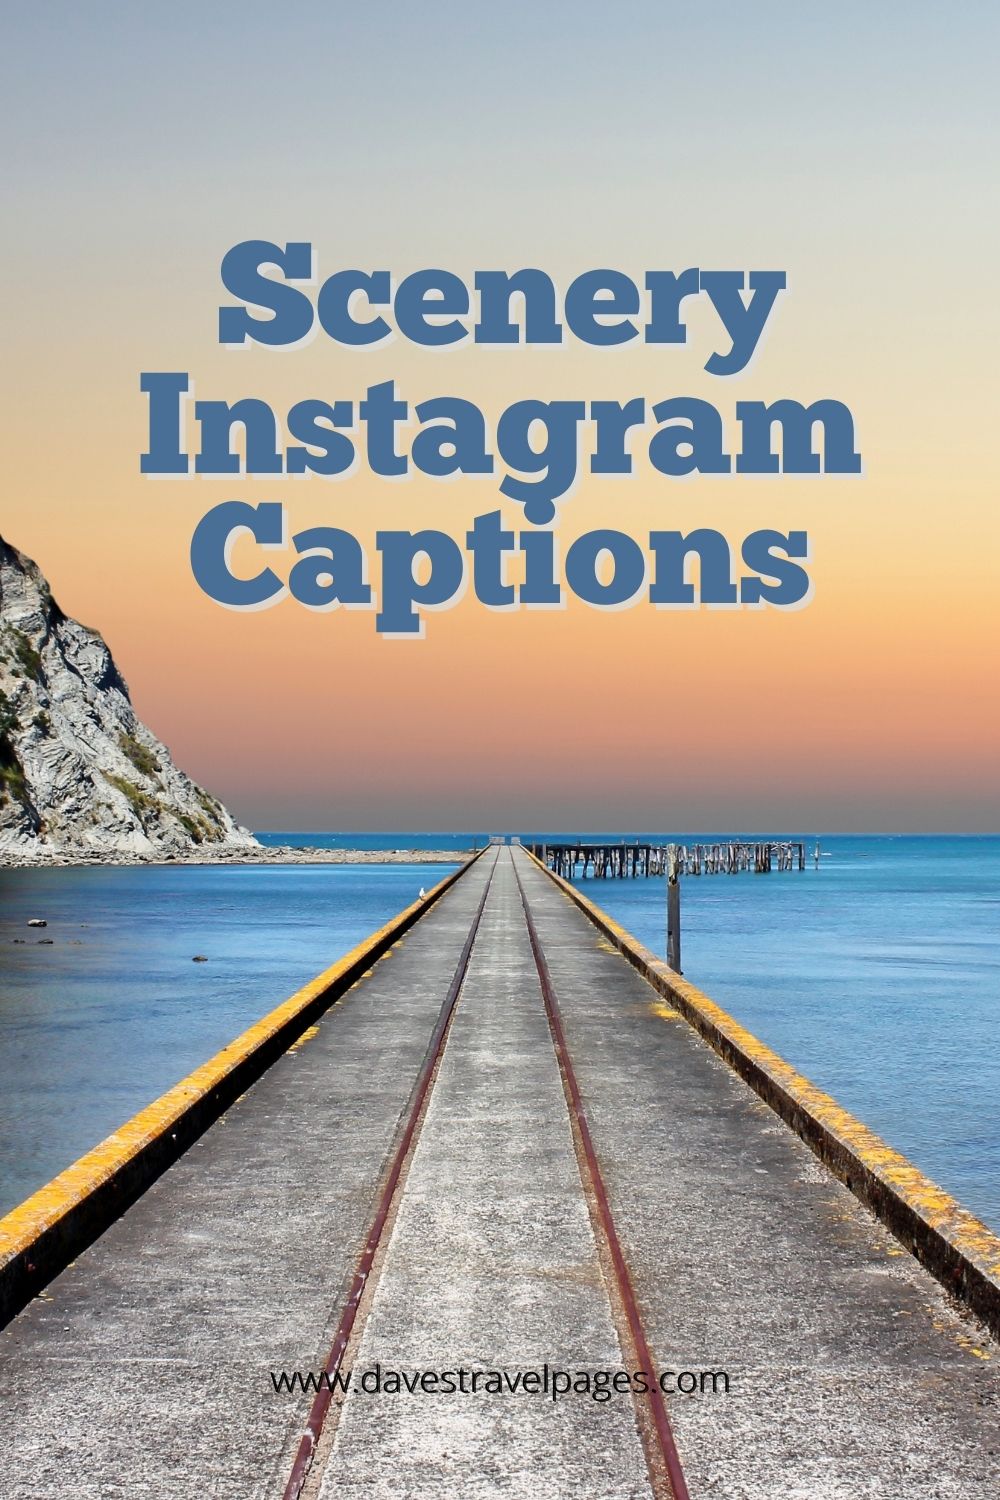 The Top Instagram Captions To Describe Scenic Beauty